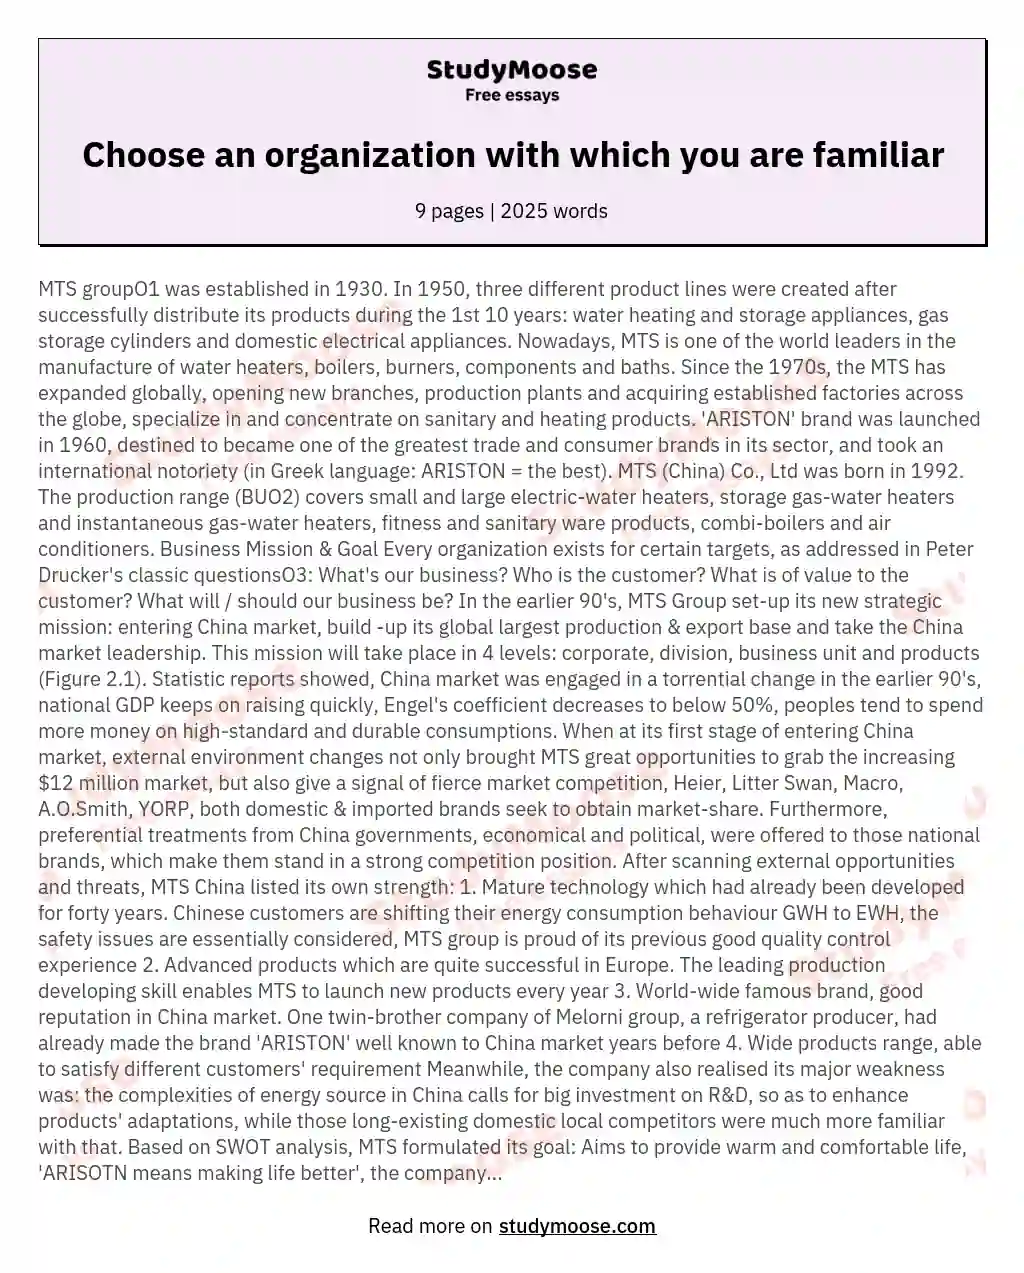 Choose an organization with which you are familiar essay